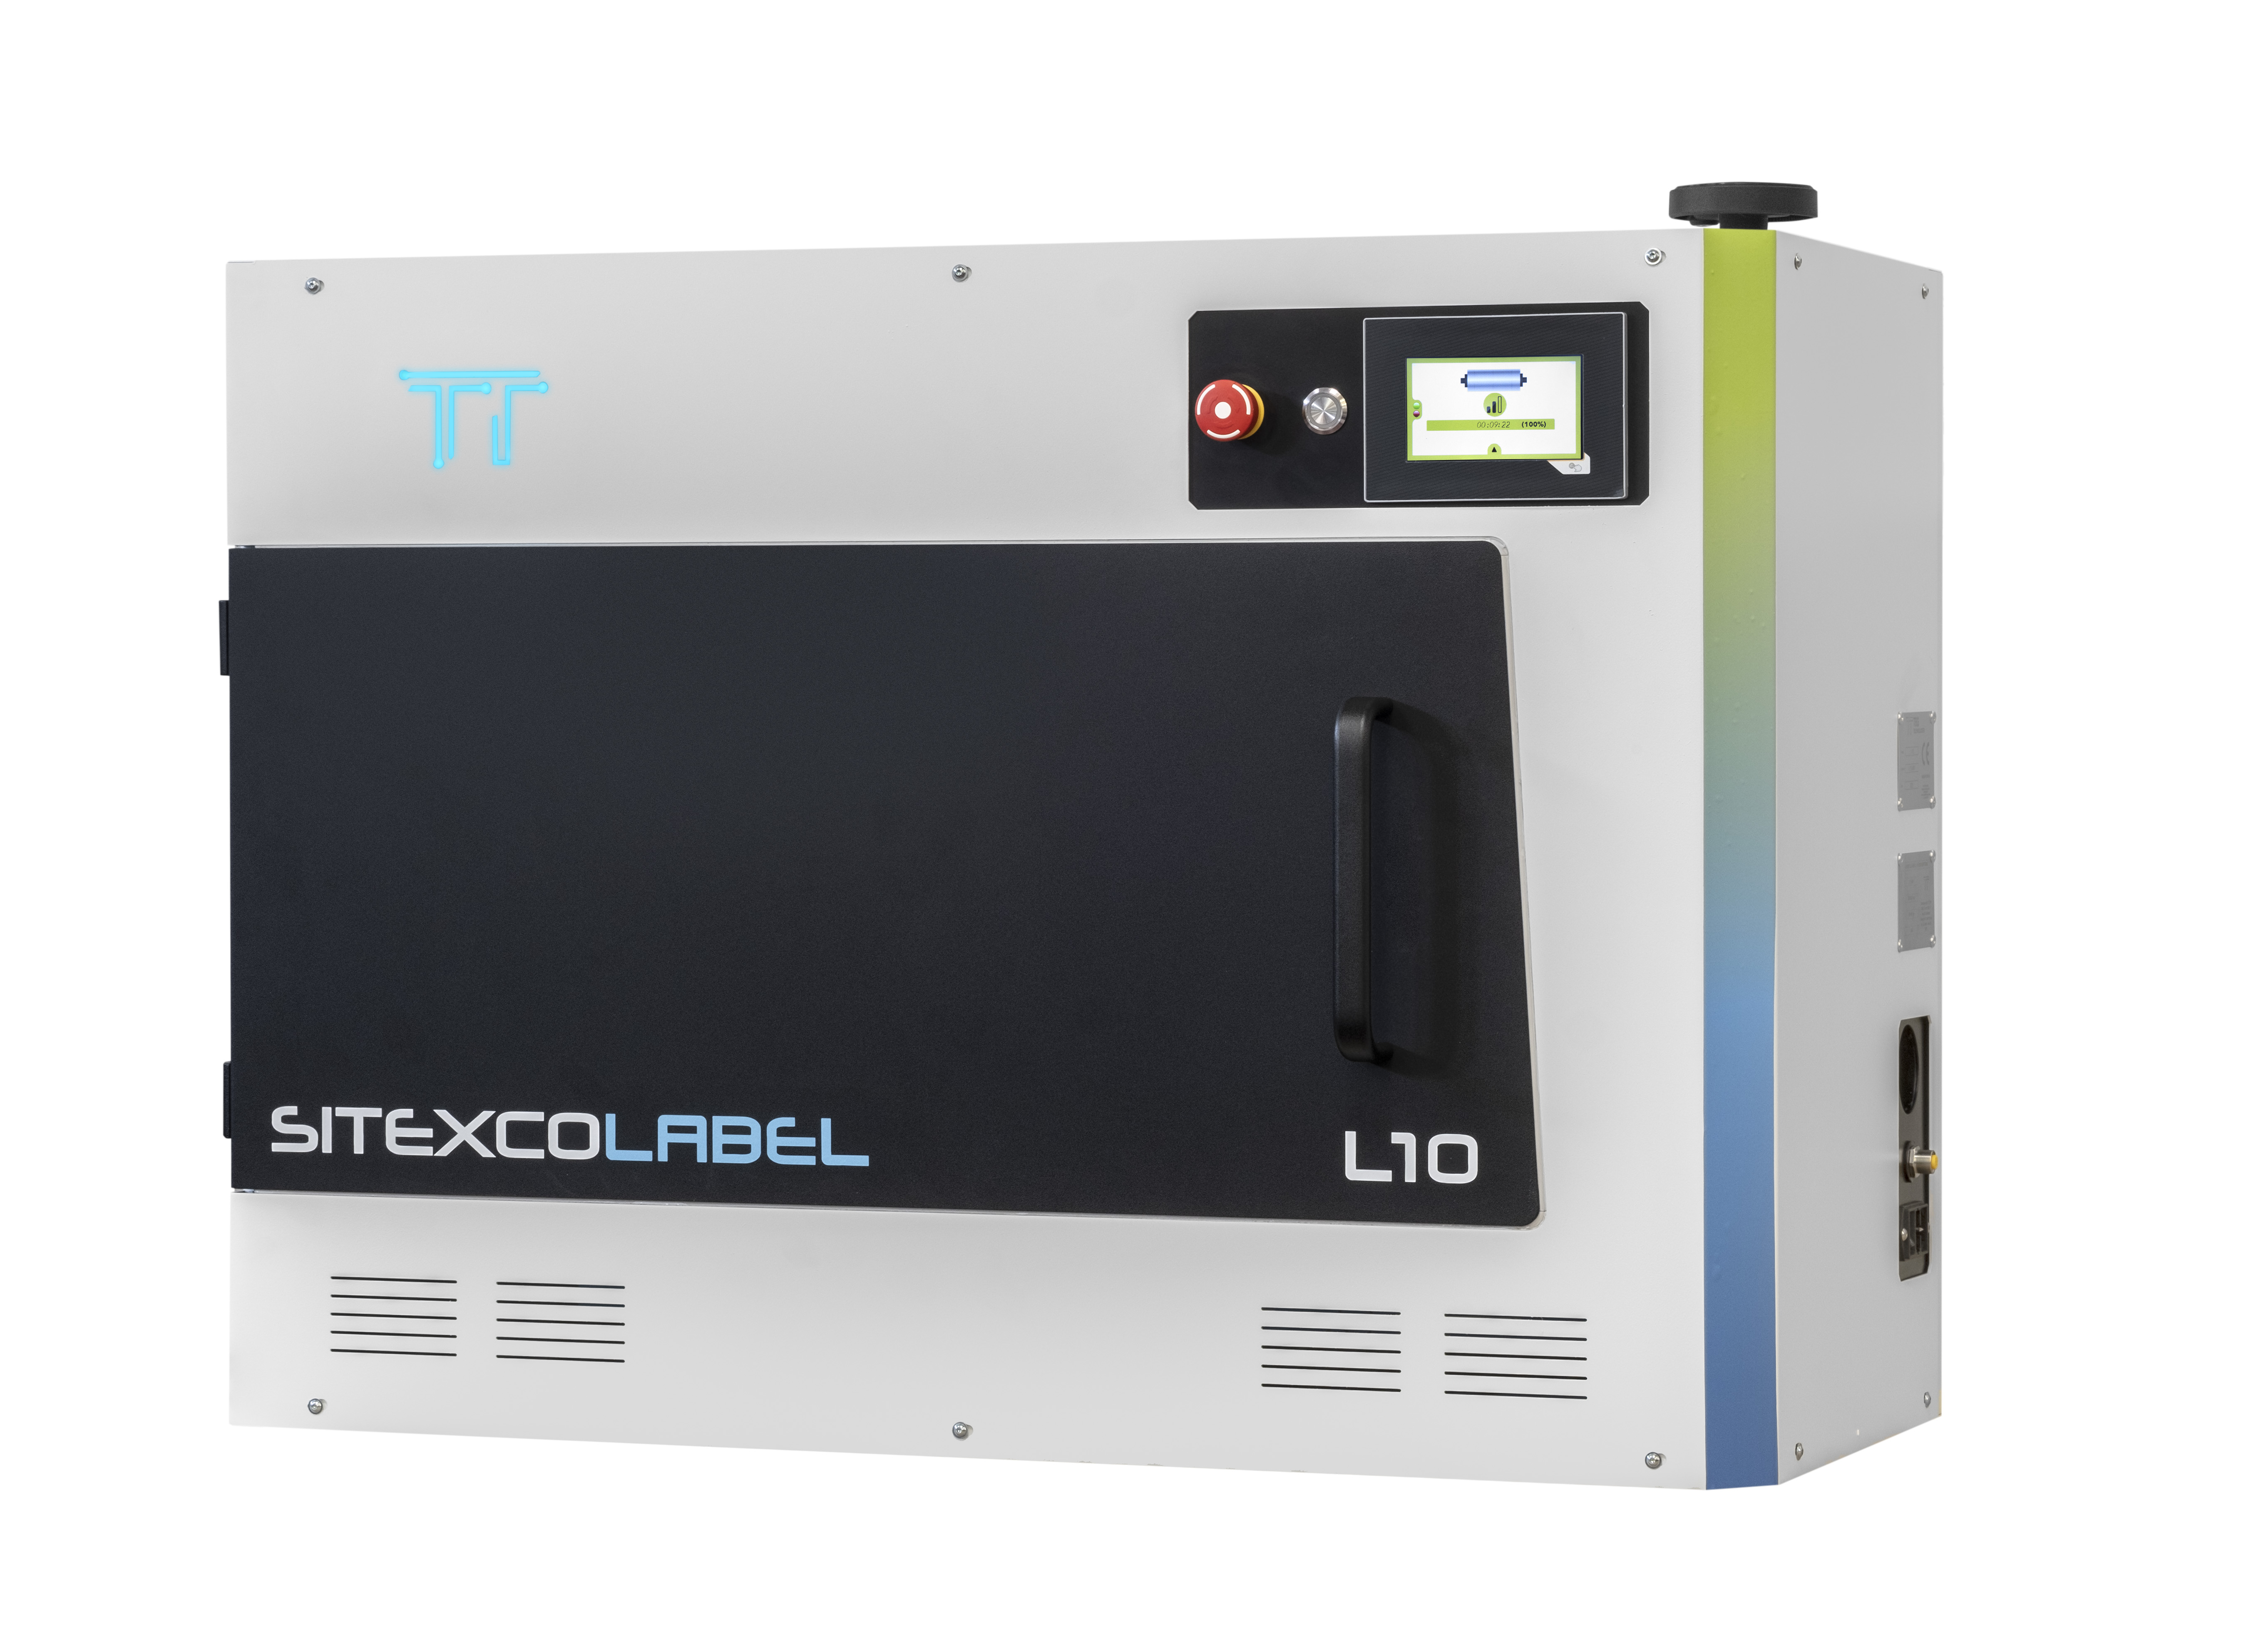 Image of The Sitexco Label L10 Anilox Cleaning System